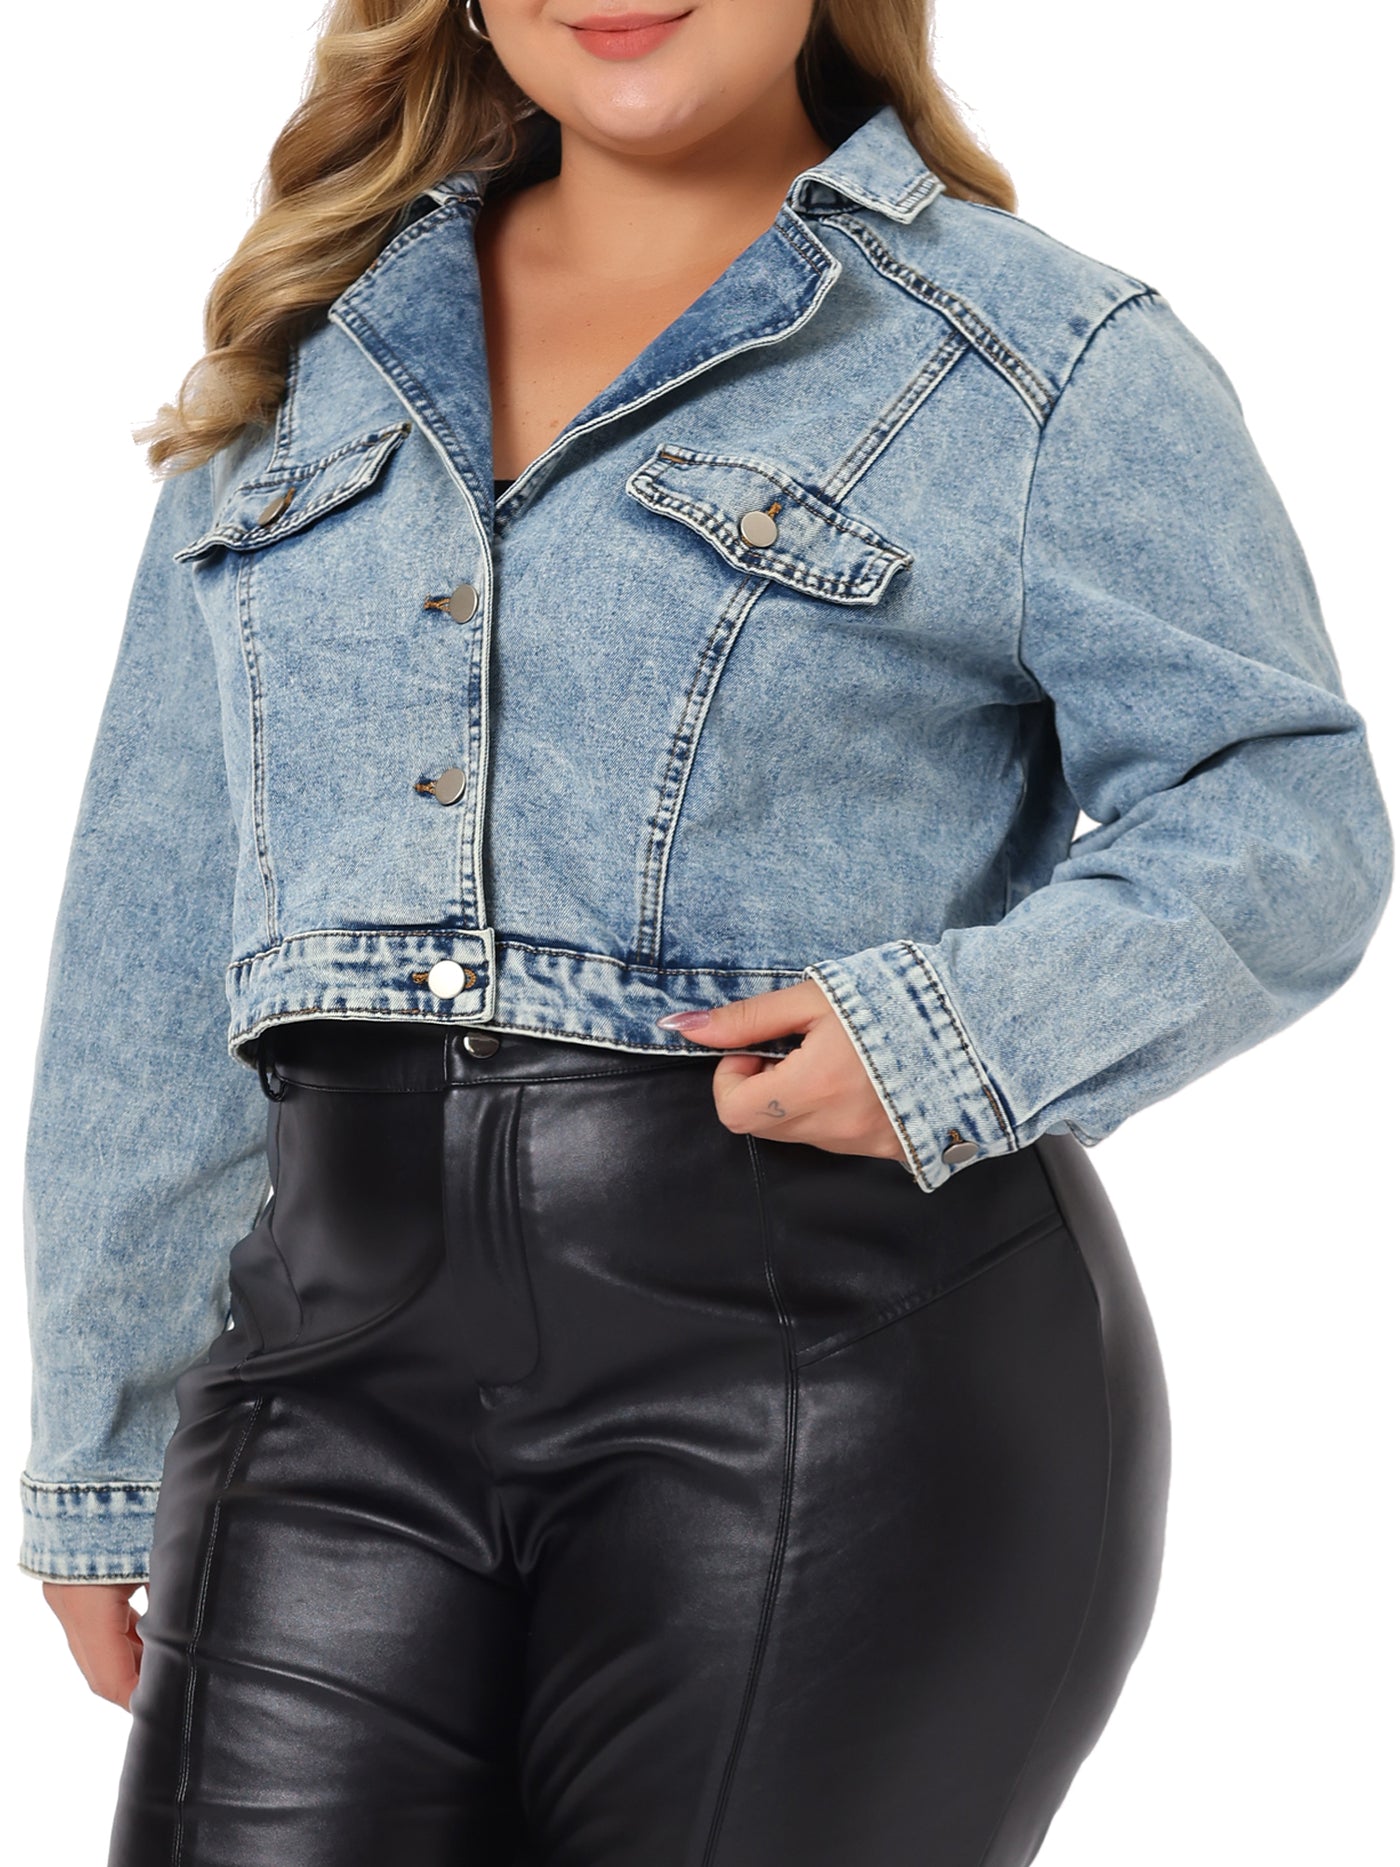 Plus Size Jean Jackets for Women | Old Navy